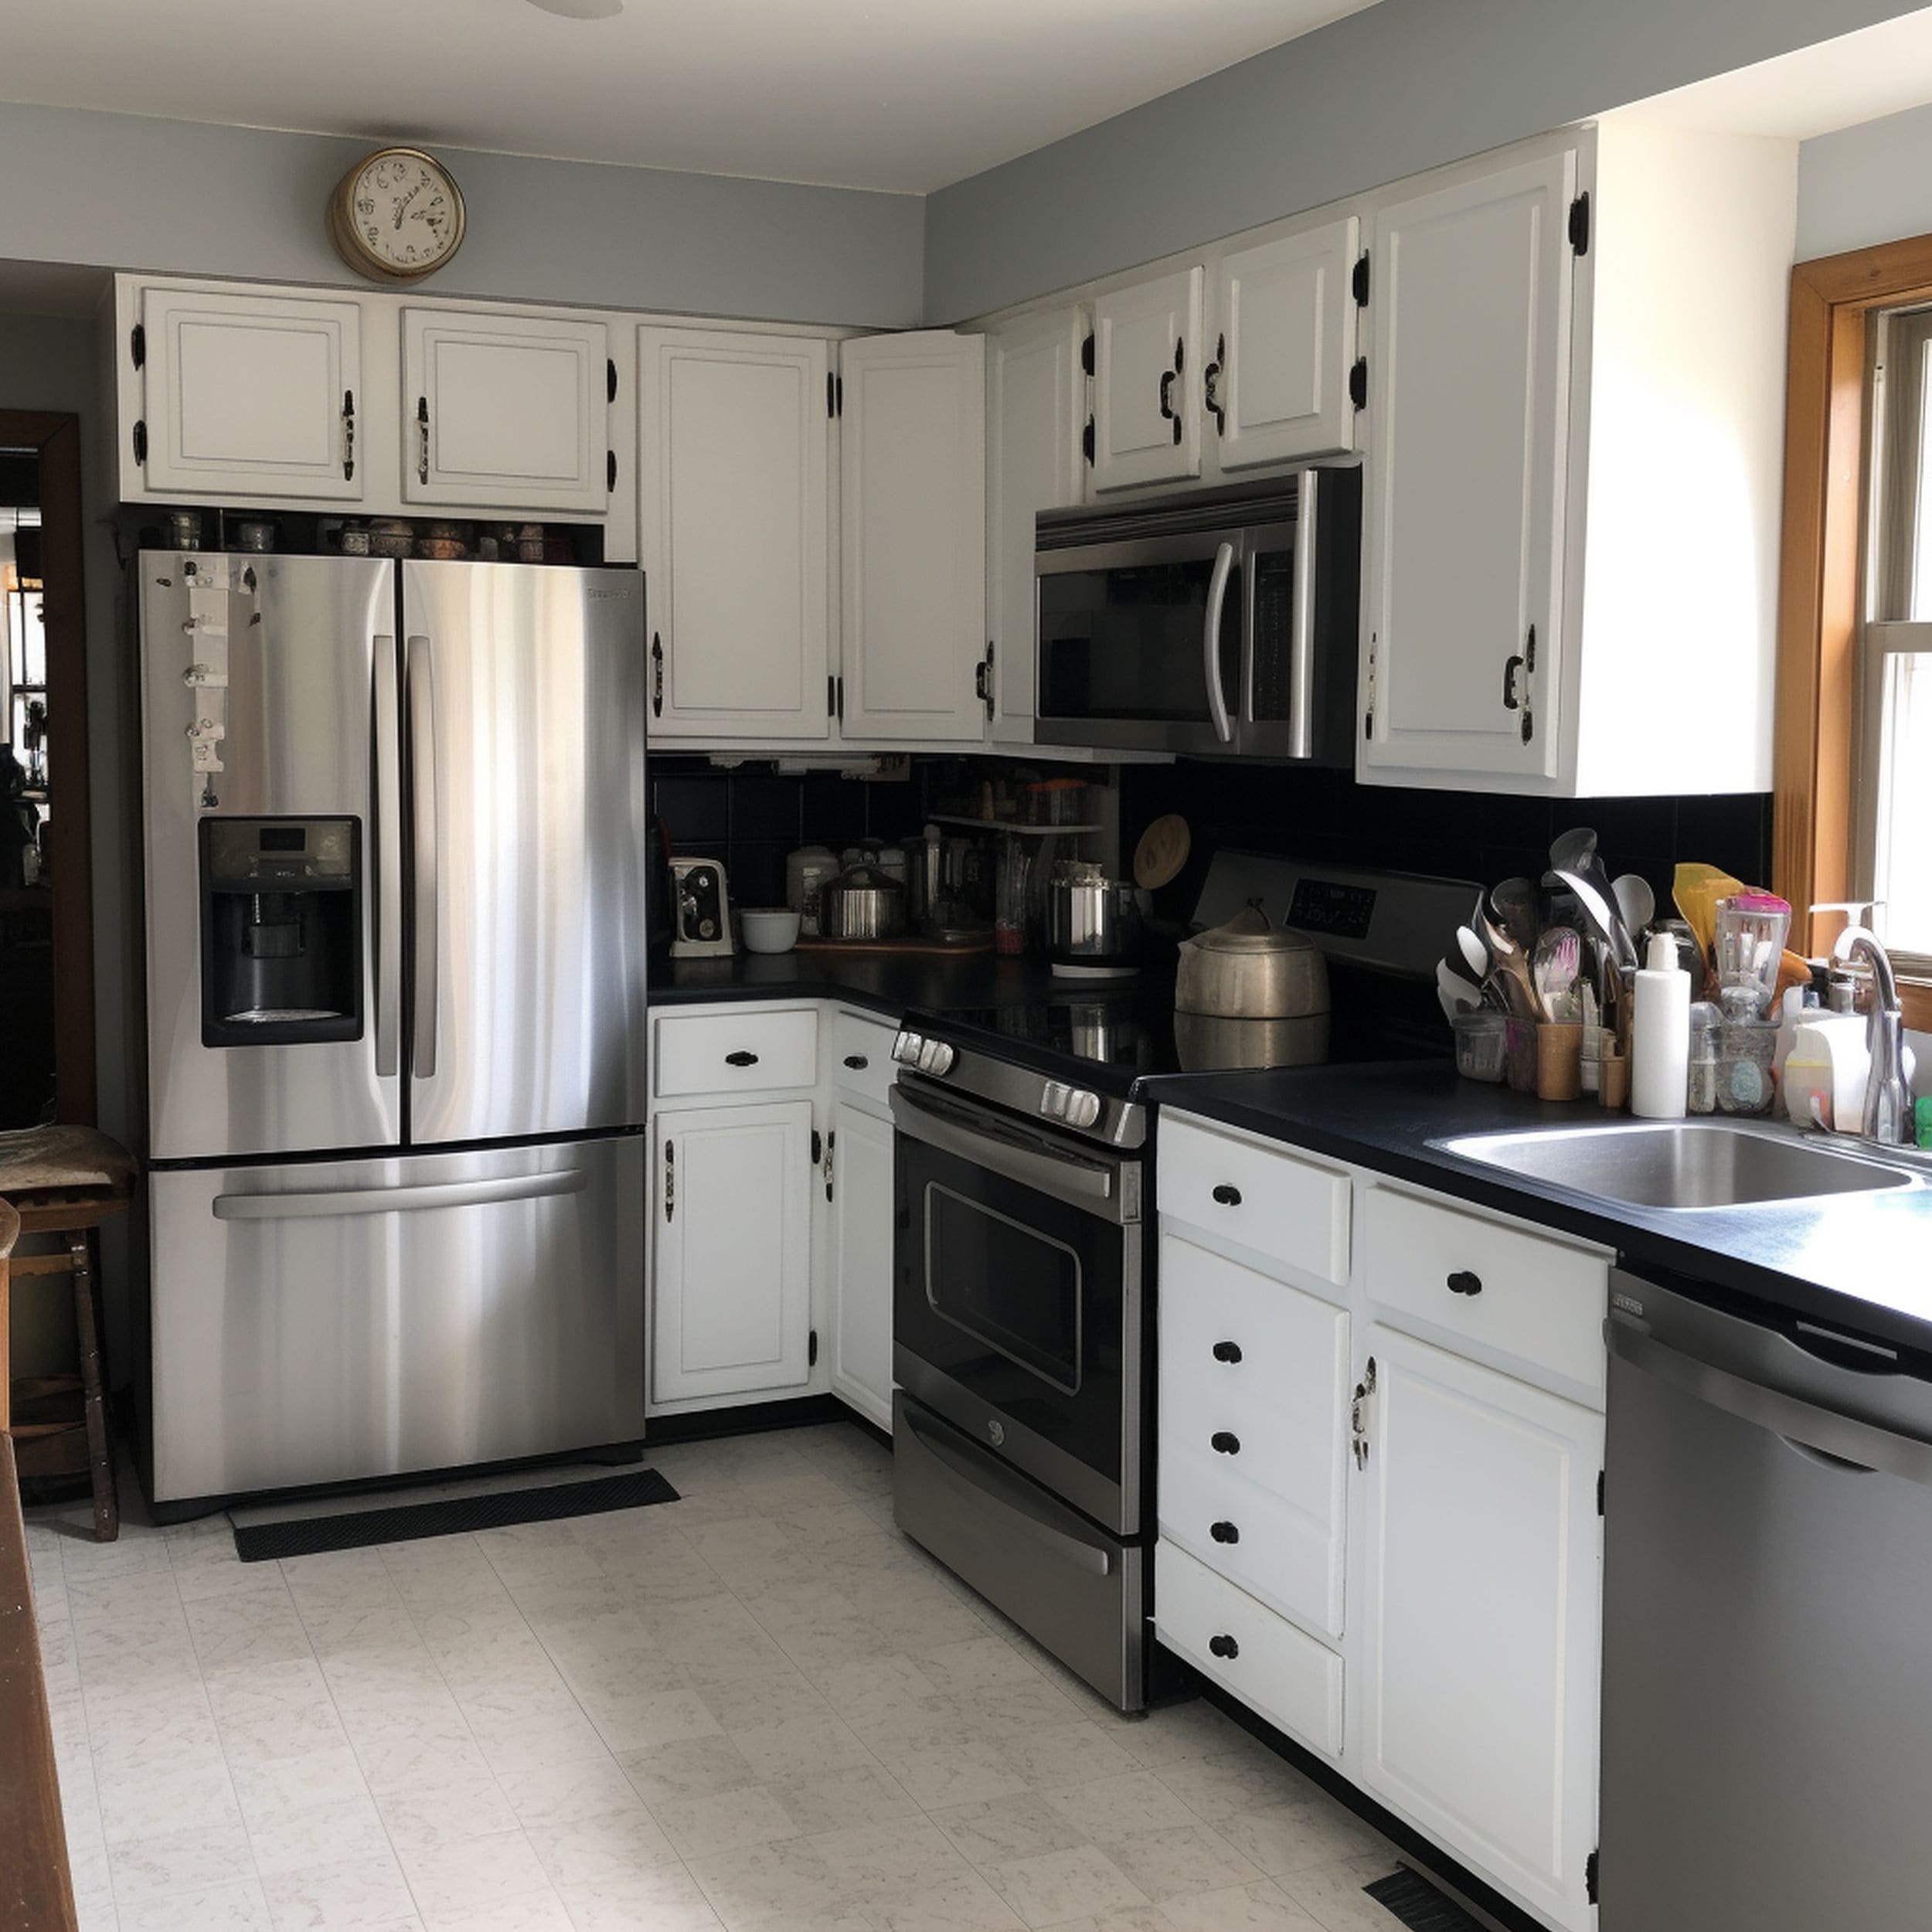 Outdated Kitchen With Black Stove and Stainless Steel Fridge